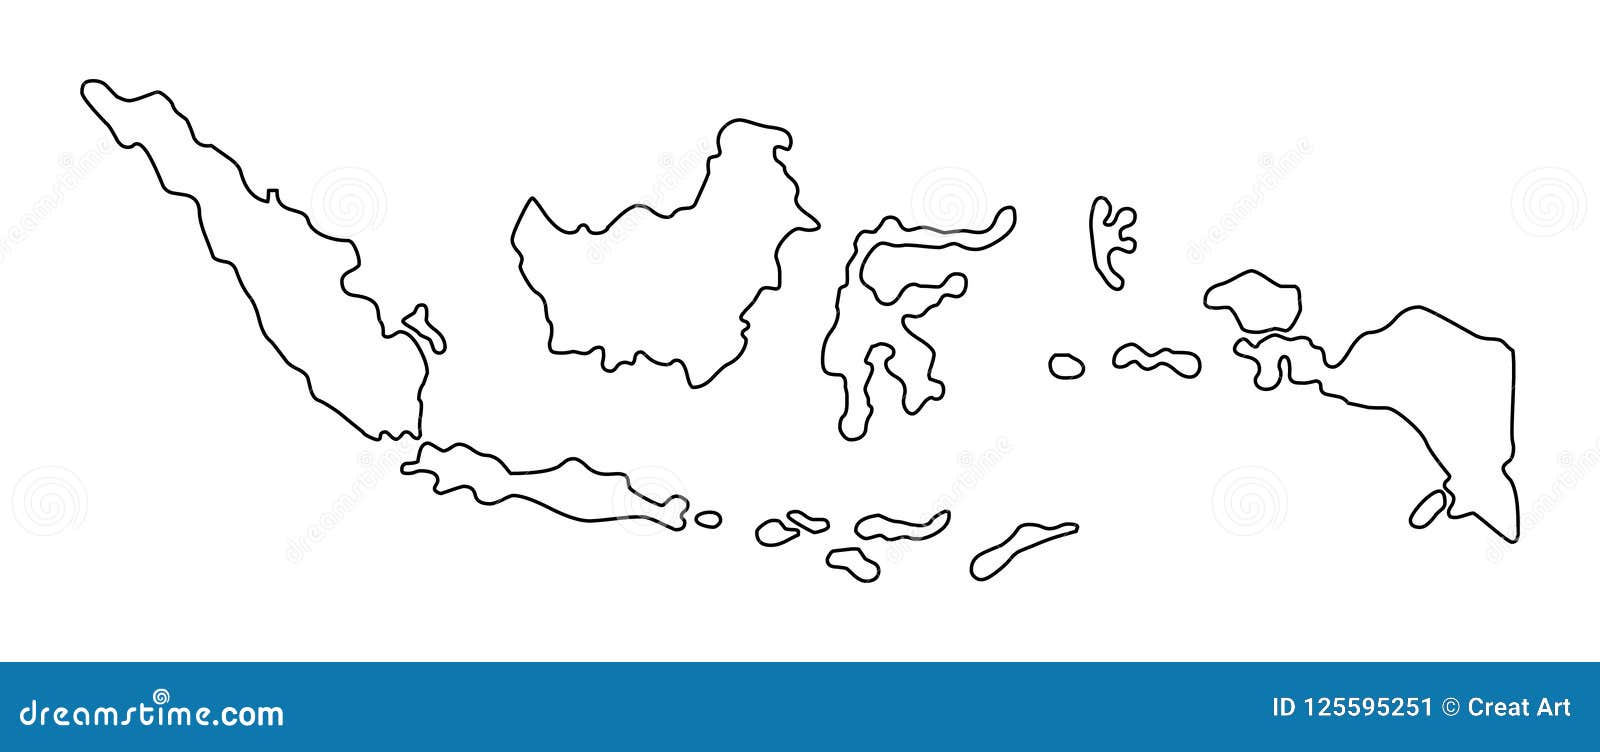  Indonesia  Outline  Map  Vector Illustration Stock Vector 